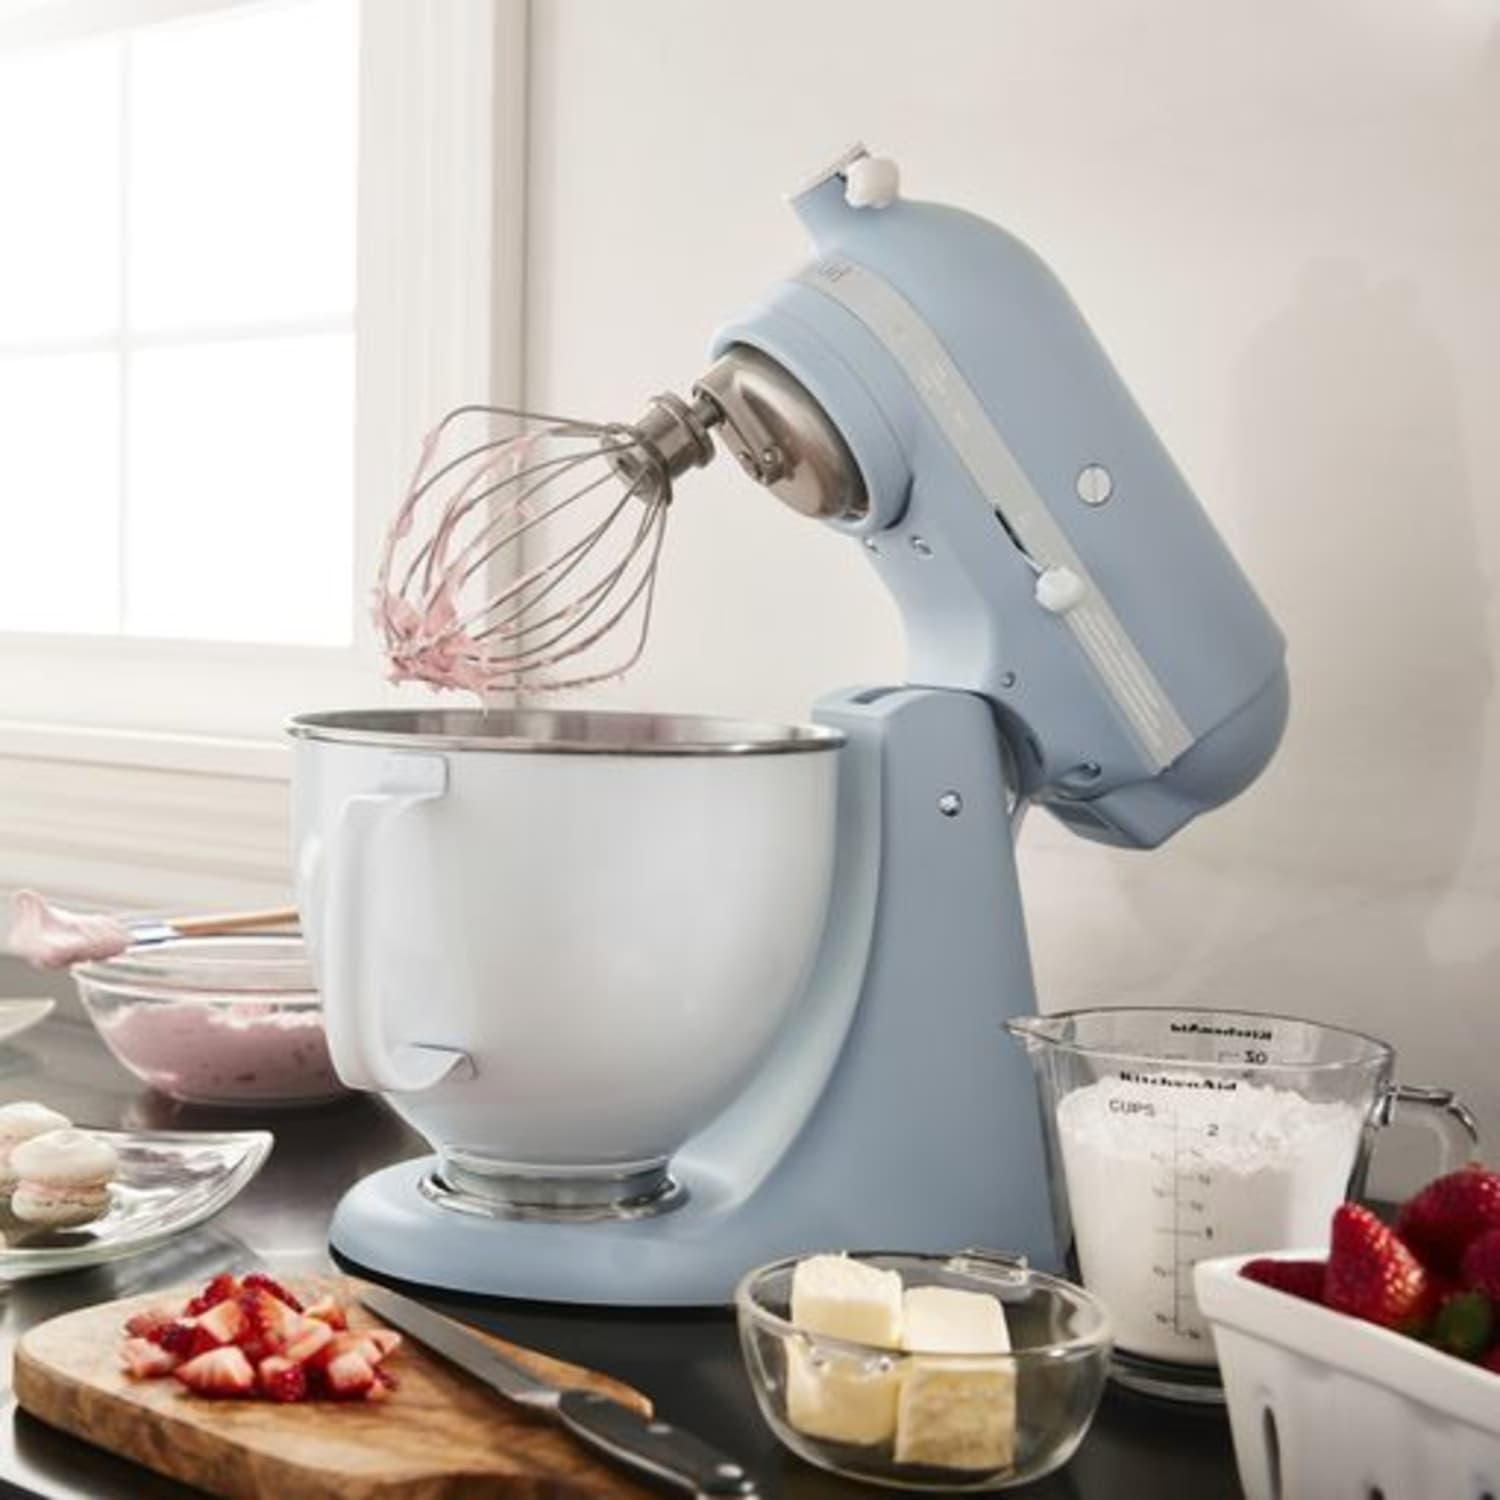 KitchenAid Retro-Inspired Color Their 100th Anniversary | Apartment Therapy